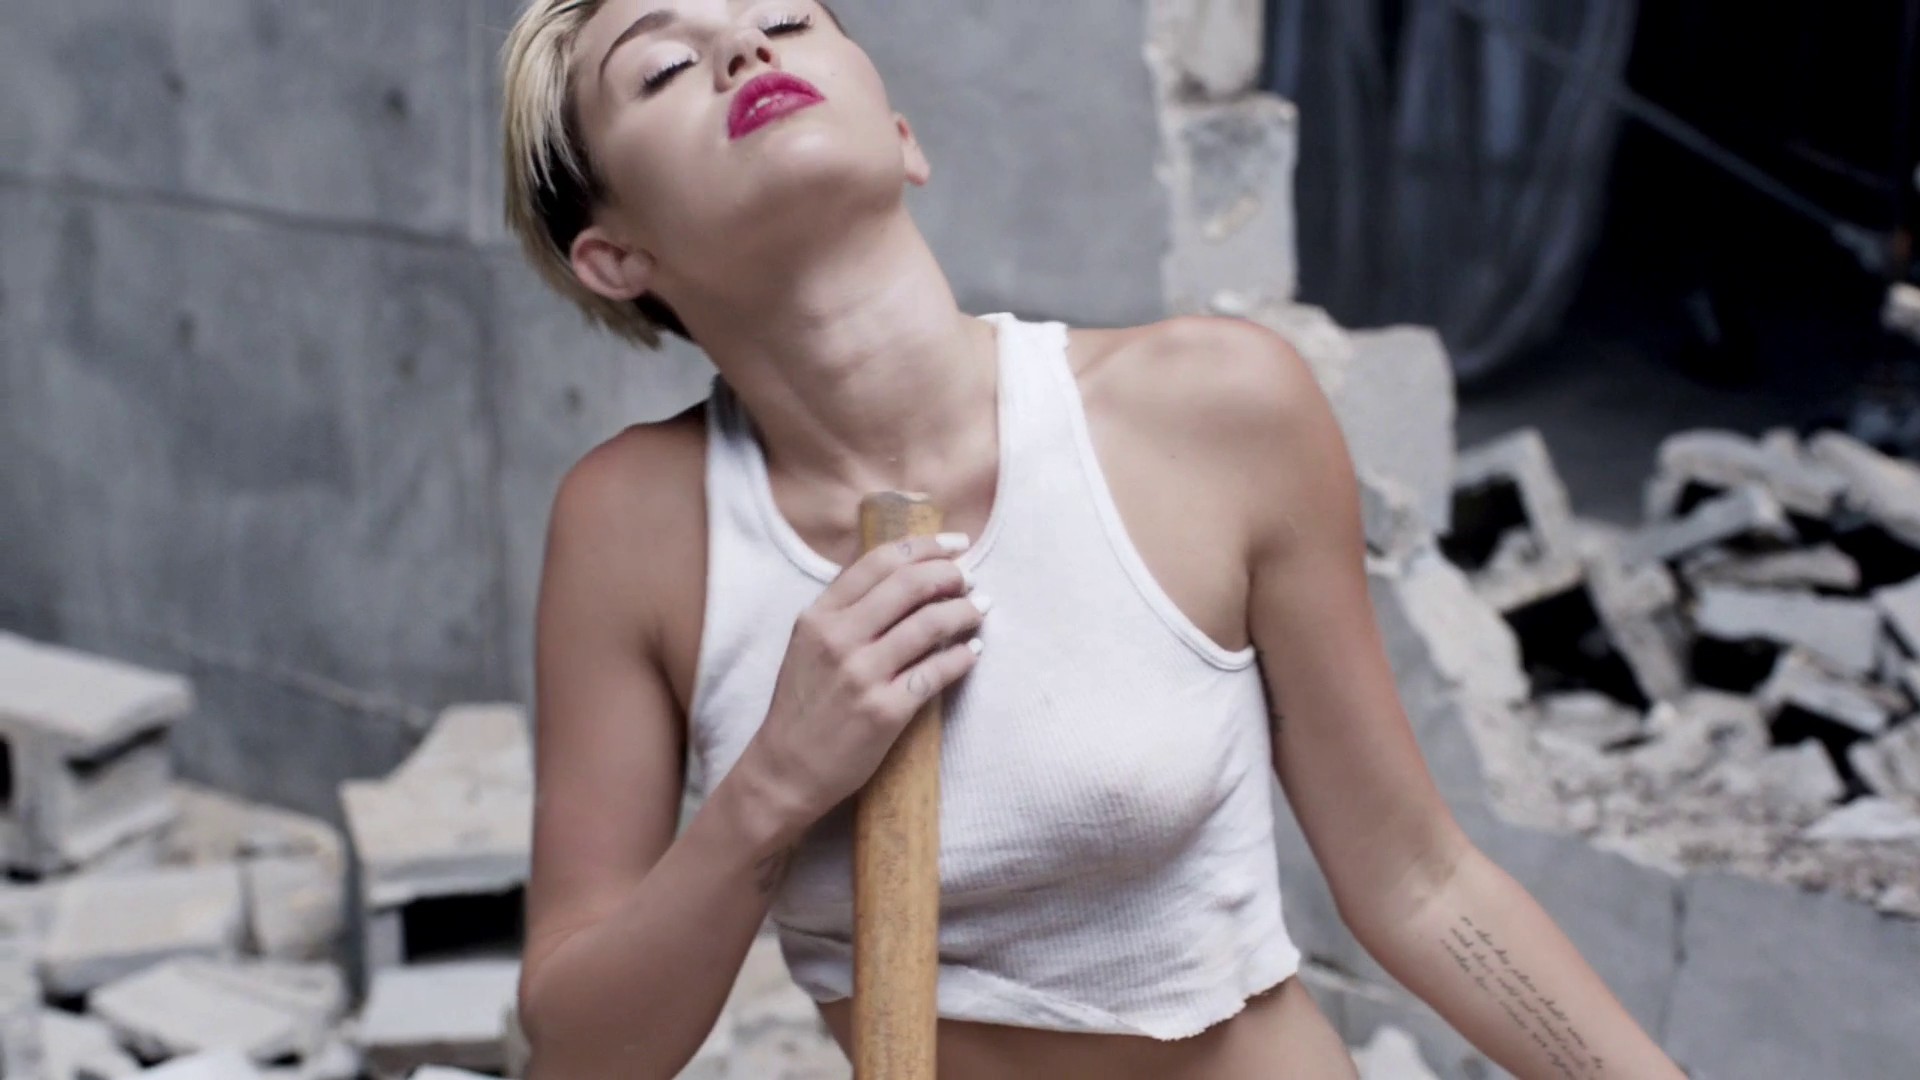 Miley Cyrus - Wrecking Ball explicit uncensored video 1080p2308.jpg